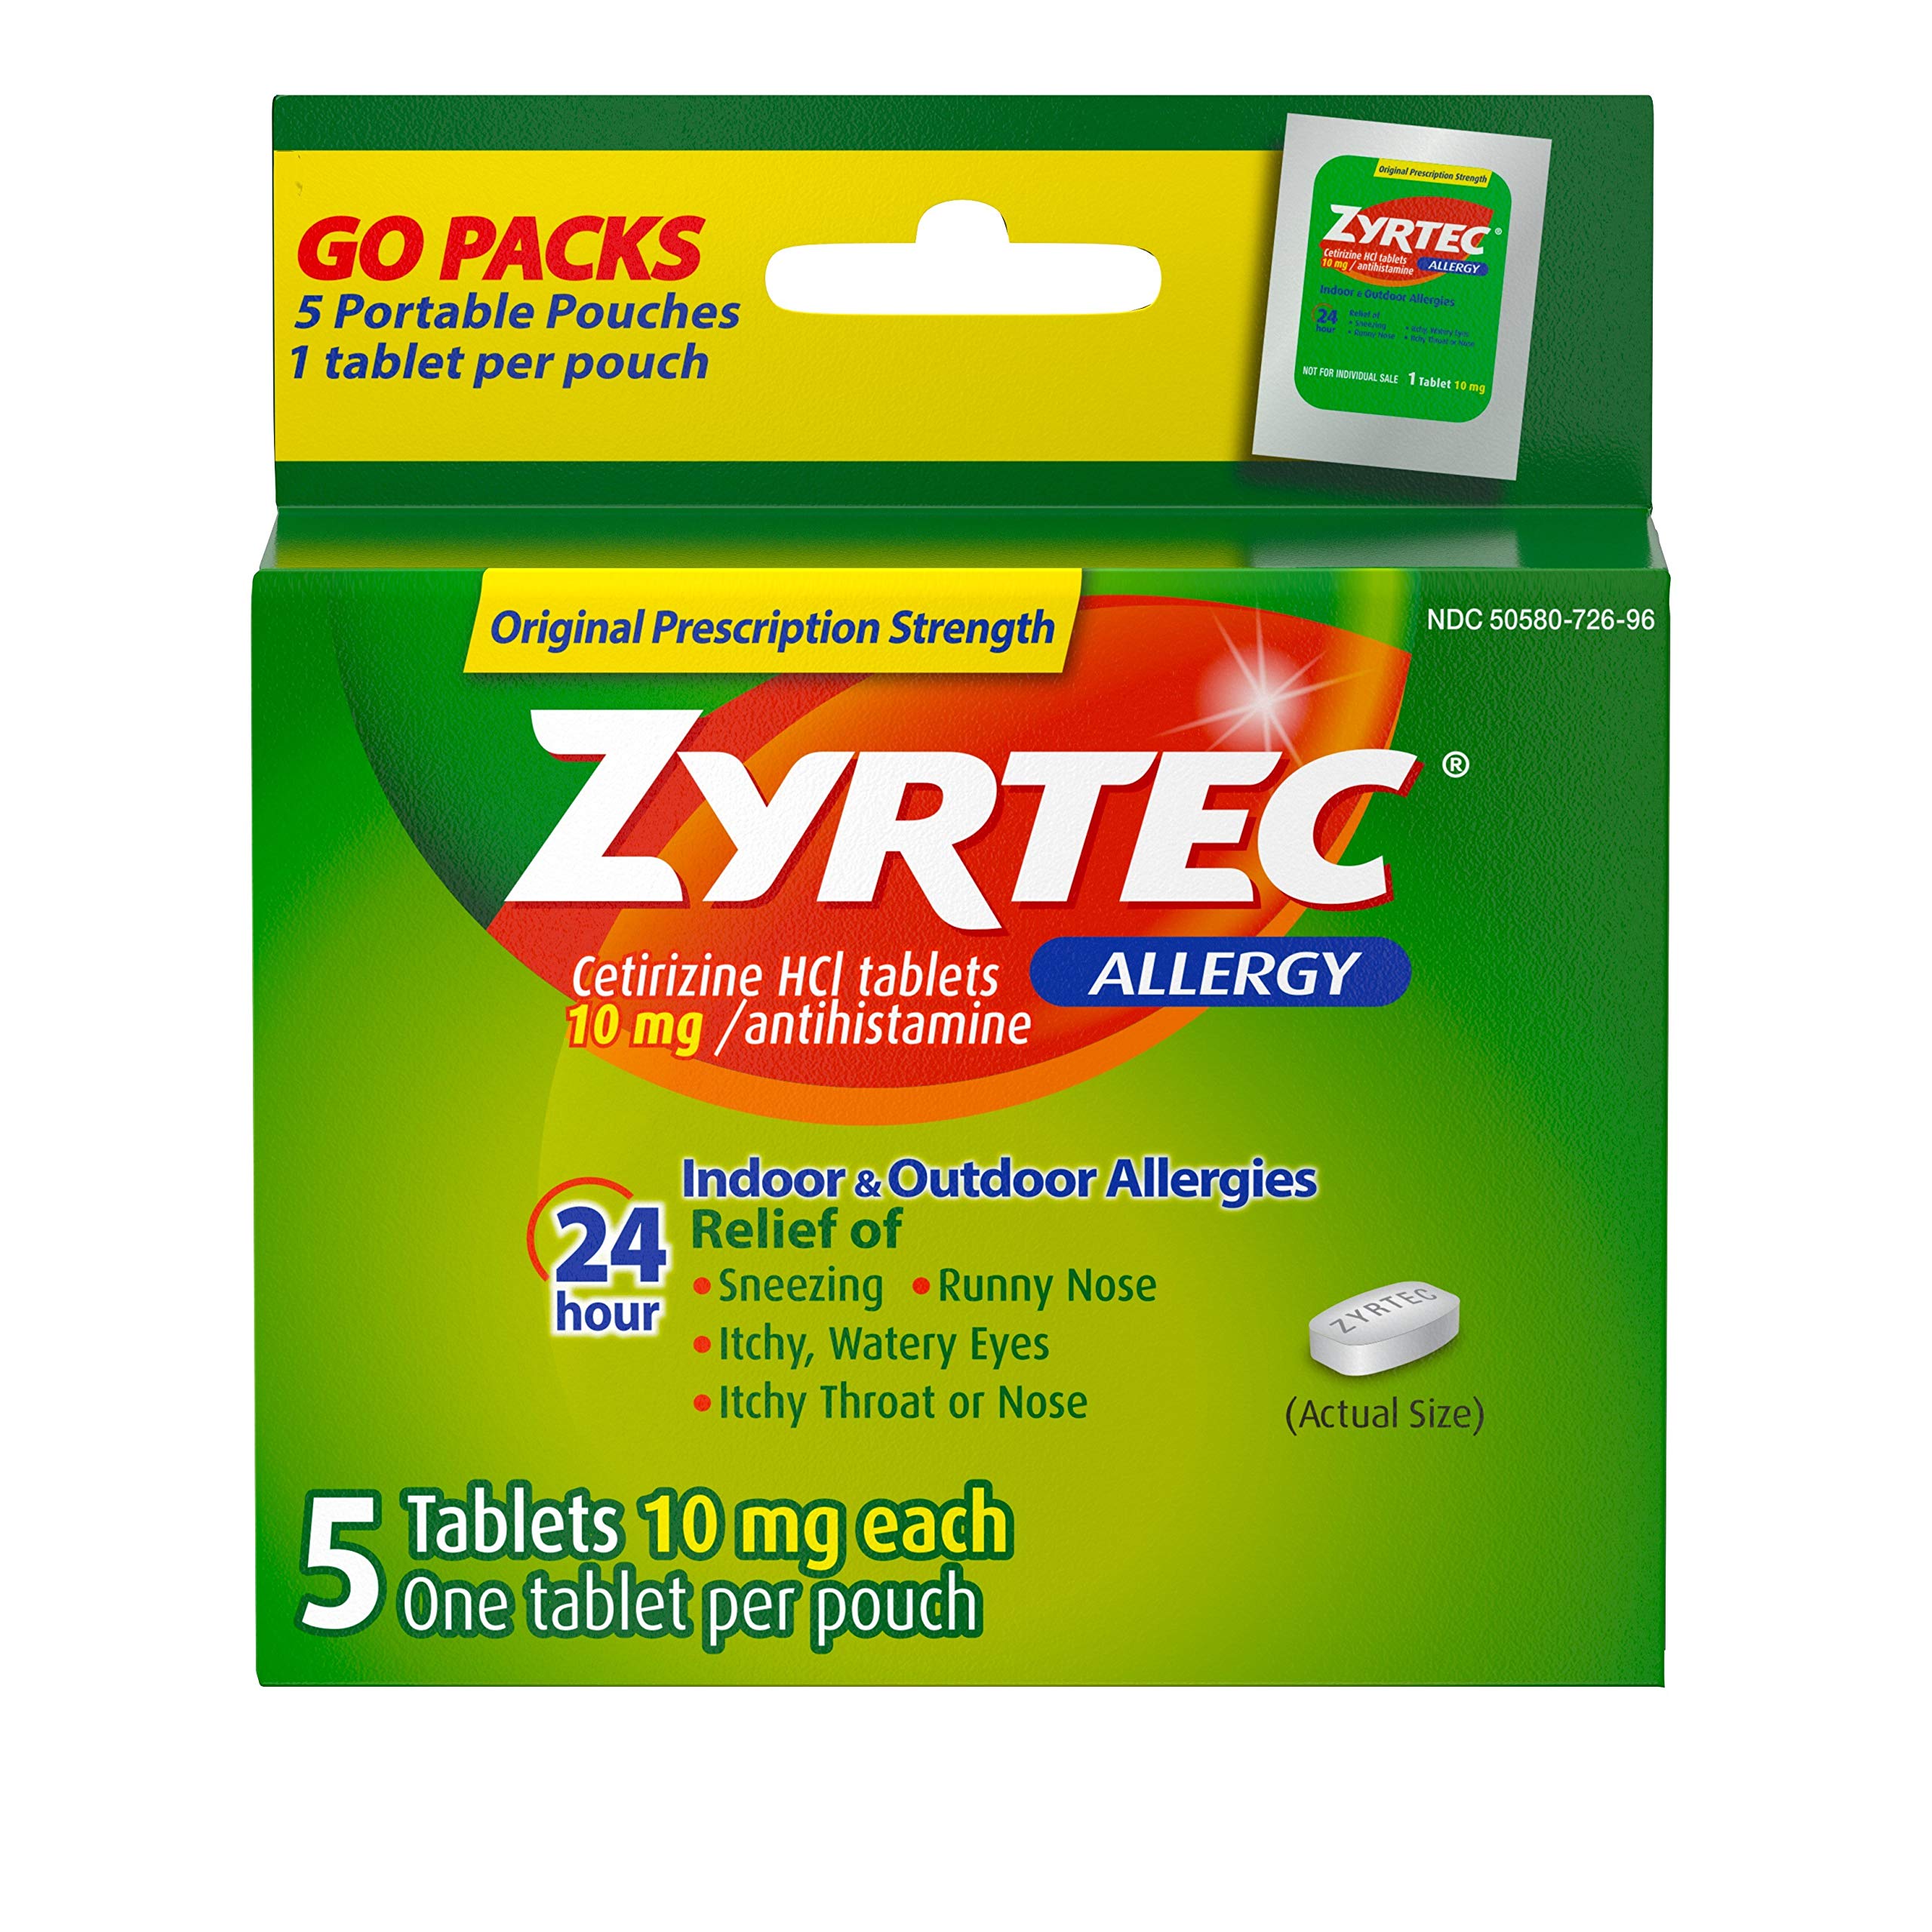 Zyrtec 24 Hour Allergy Relief Tablets, 10 mg Antihistamine with Cetirizine HCl, 5 ct